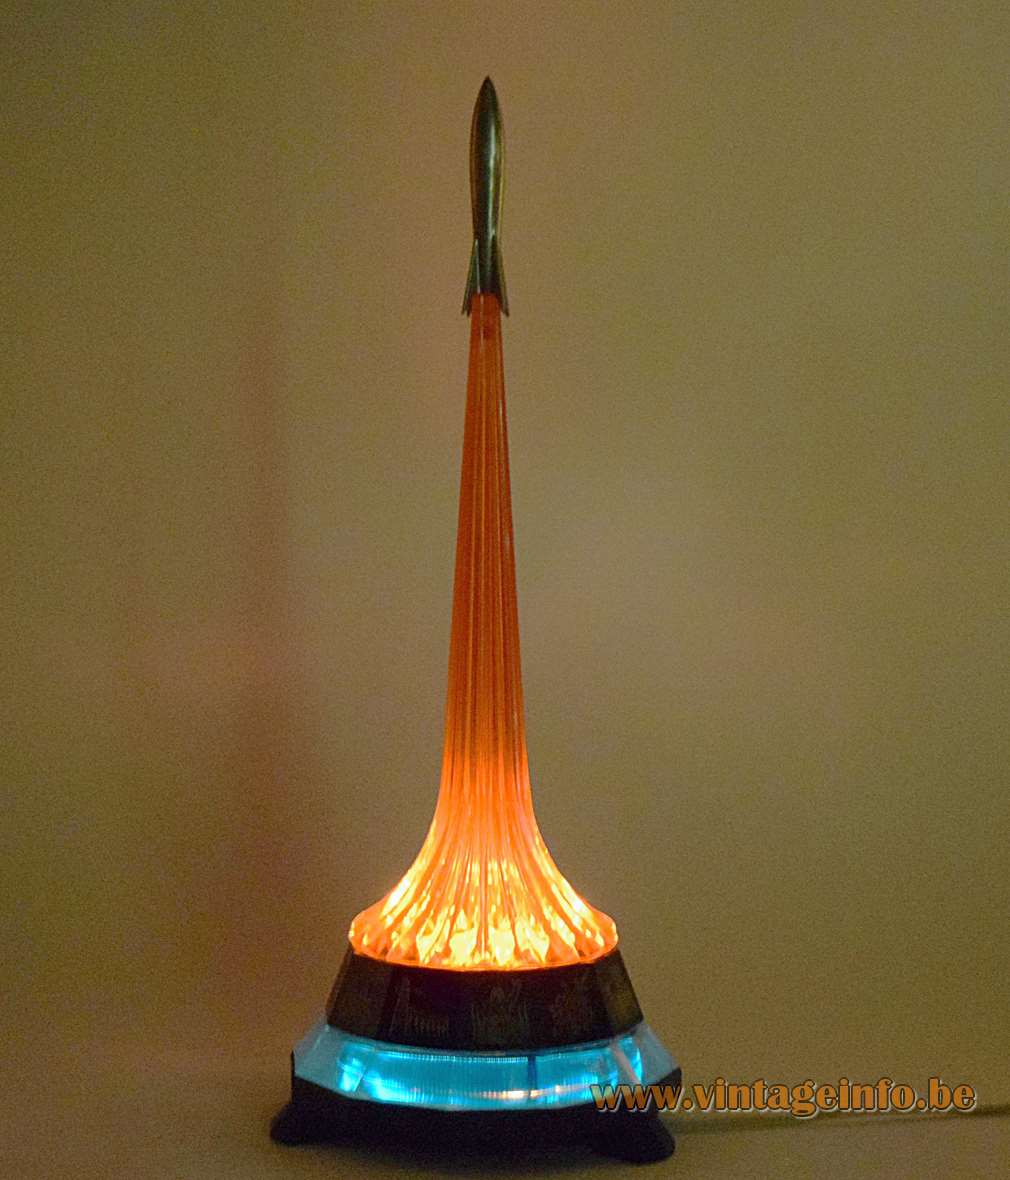 USSR rocket table lamp souvenir Conquerors of Space needle Moscow Russia Soviet Union 1960s 